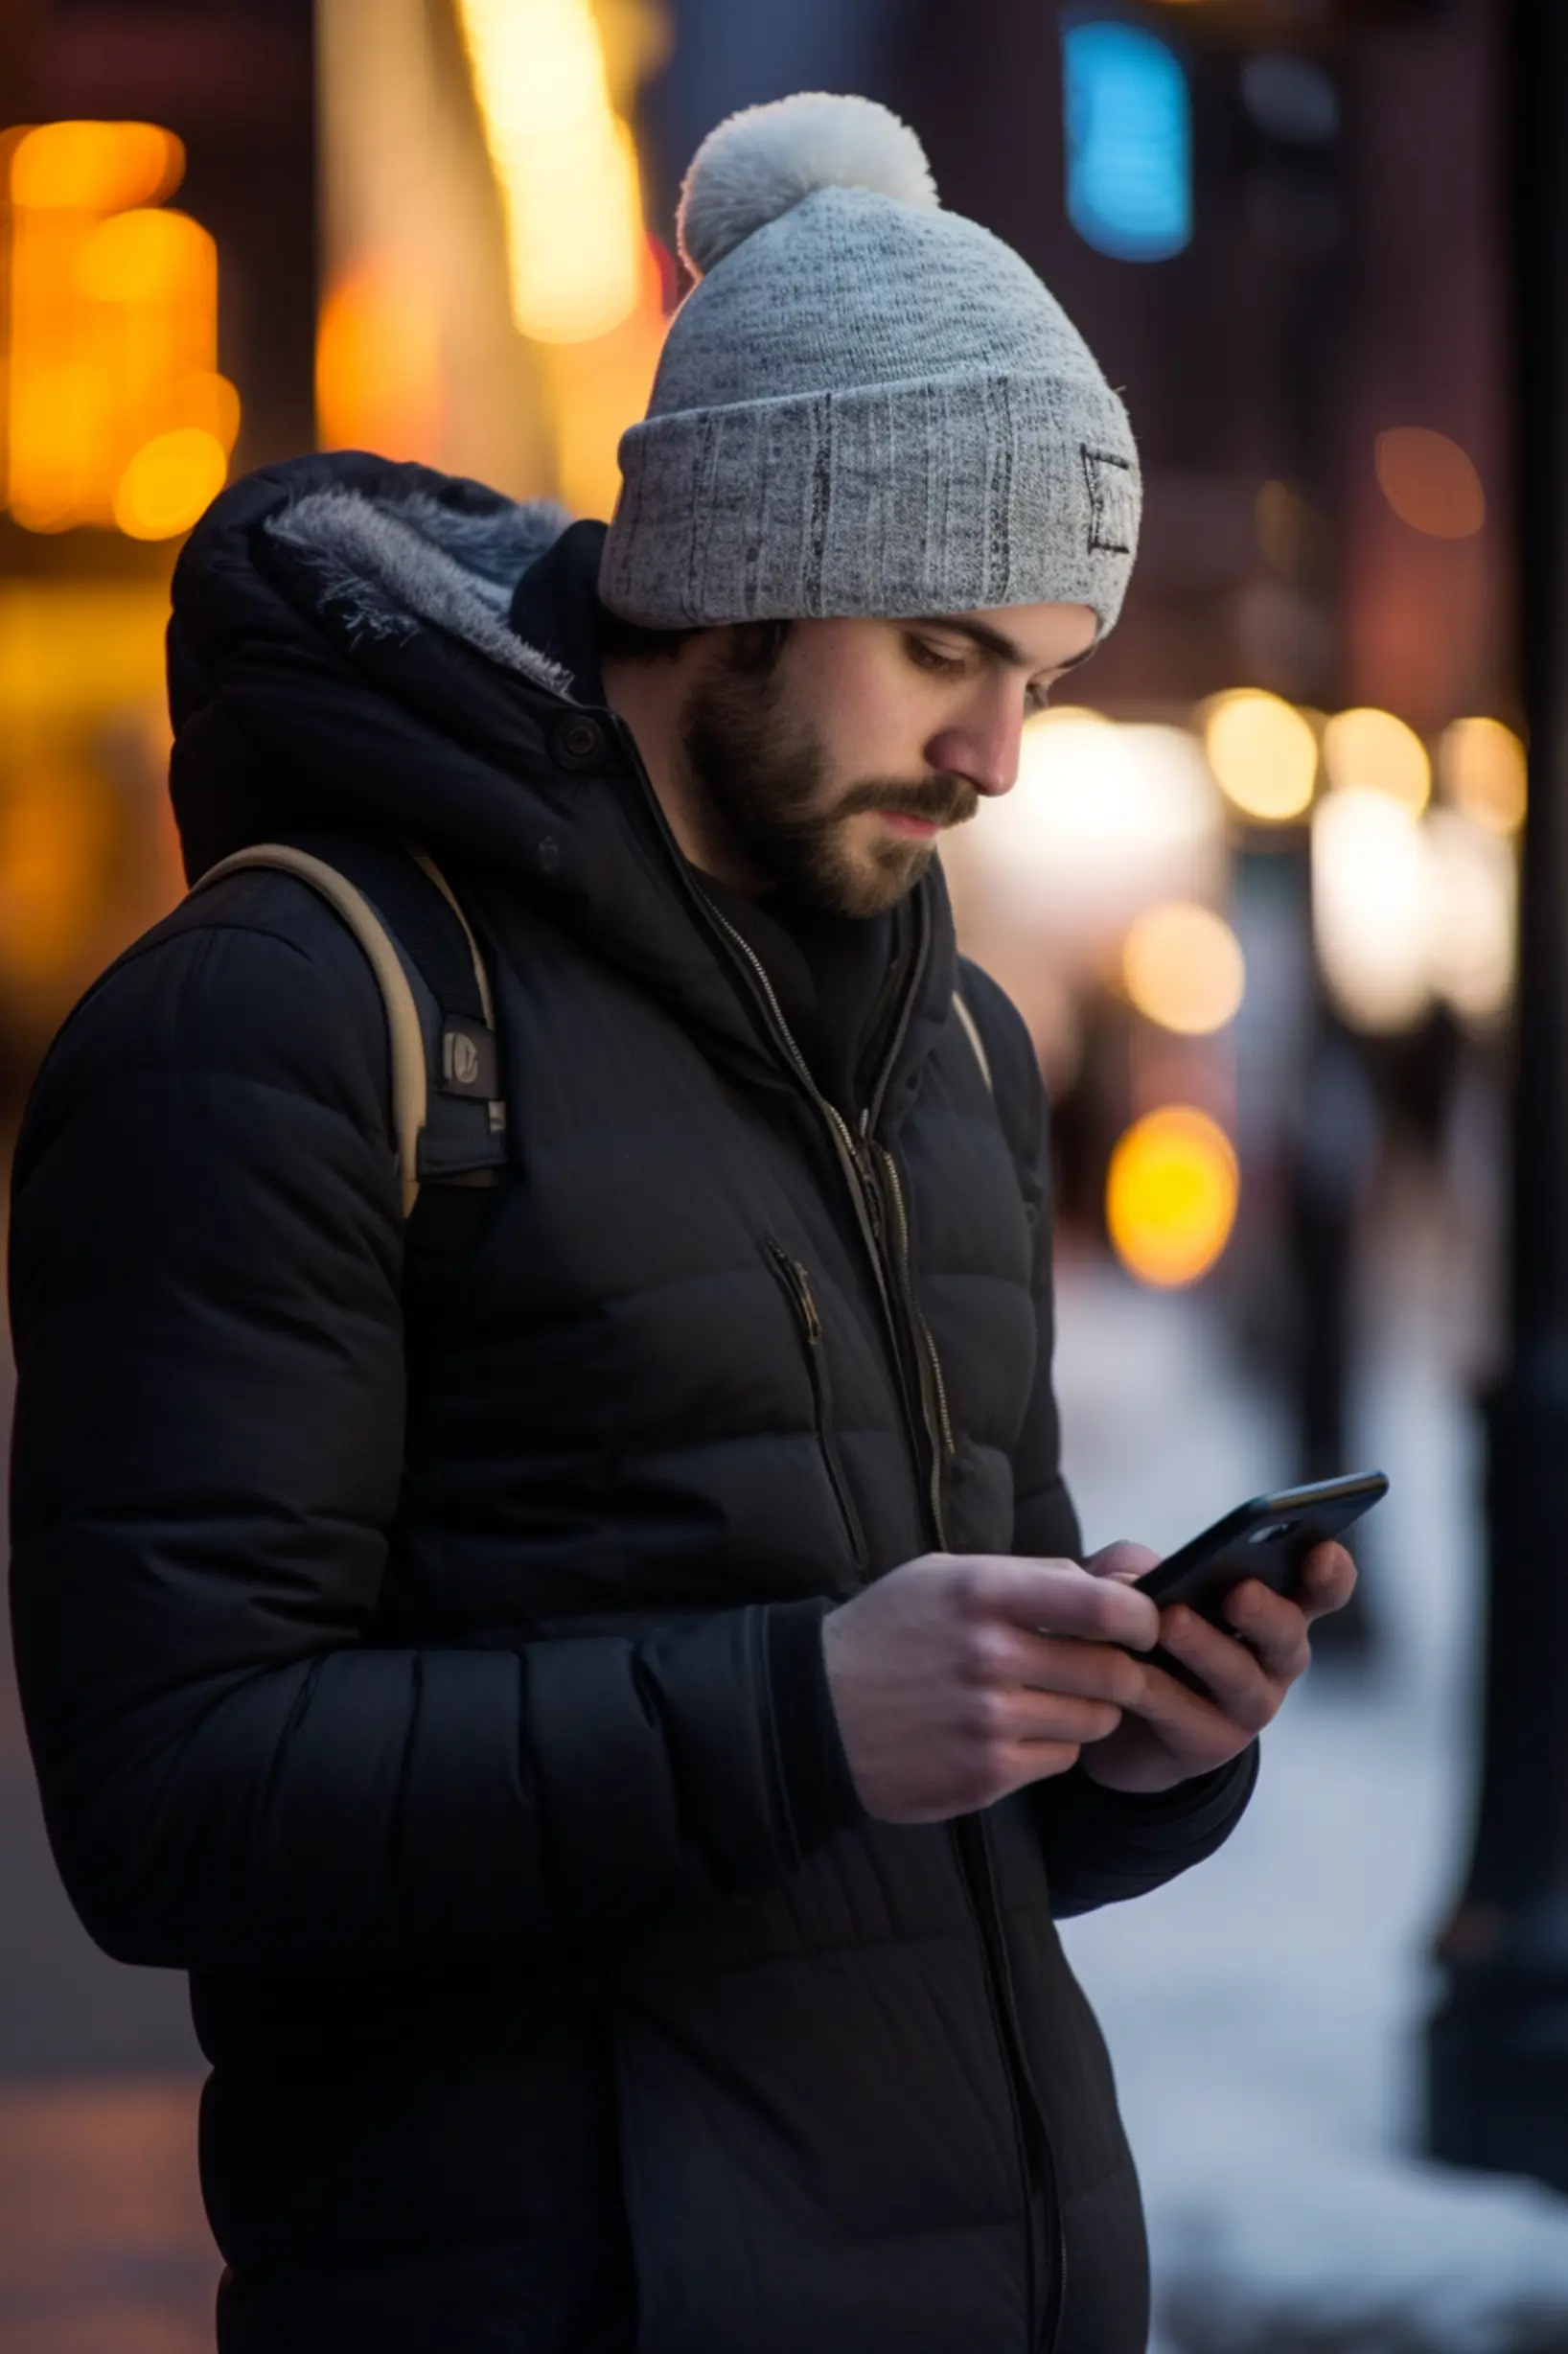 man with beanie on checking phone